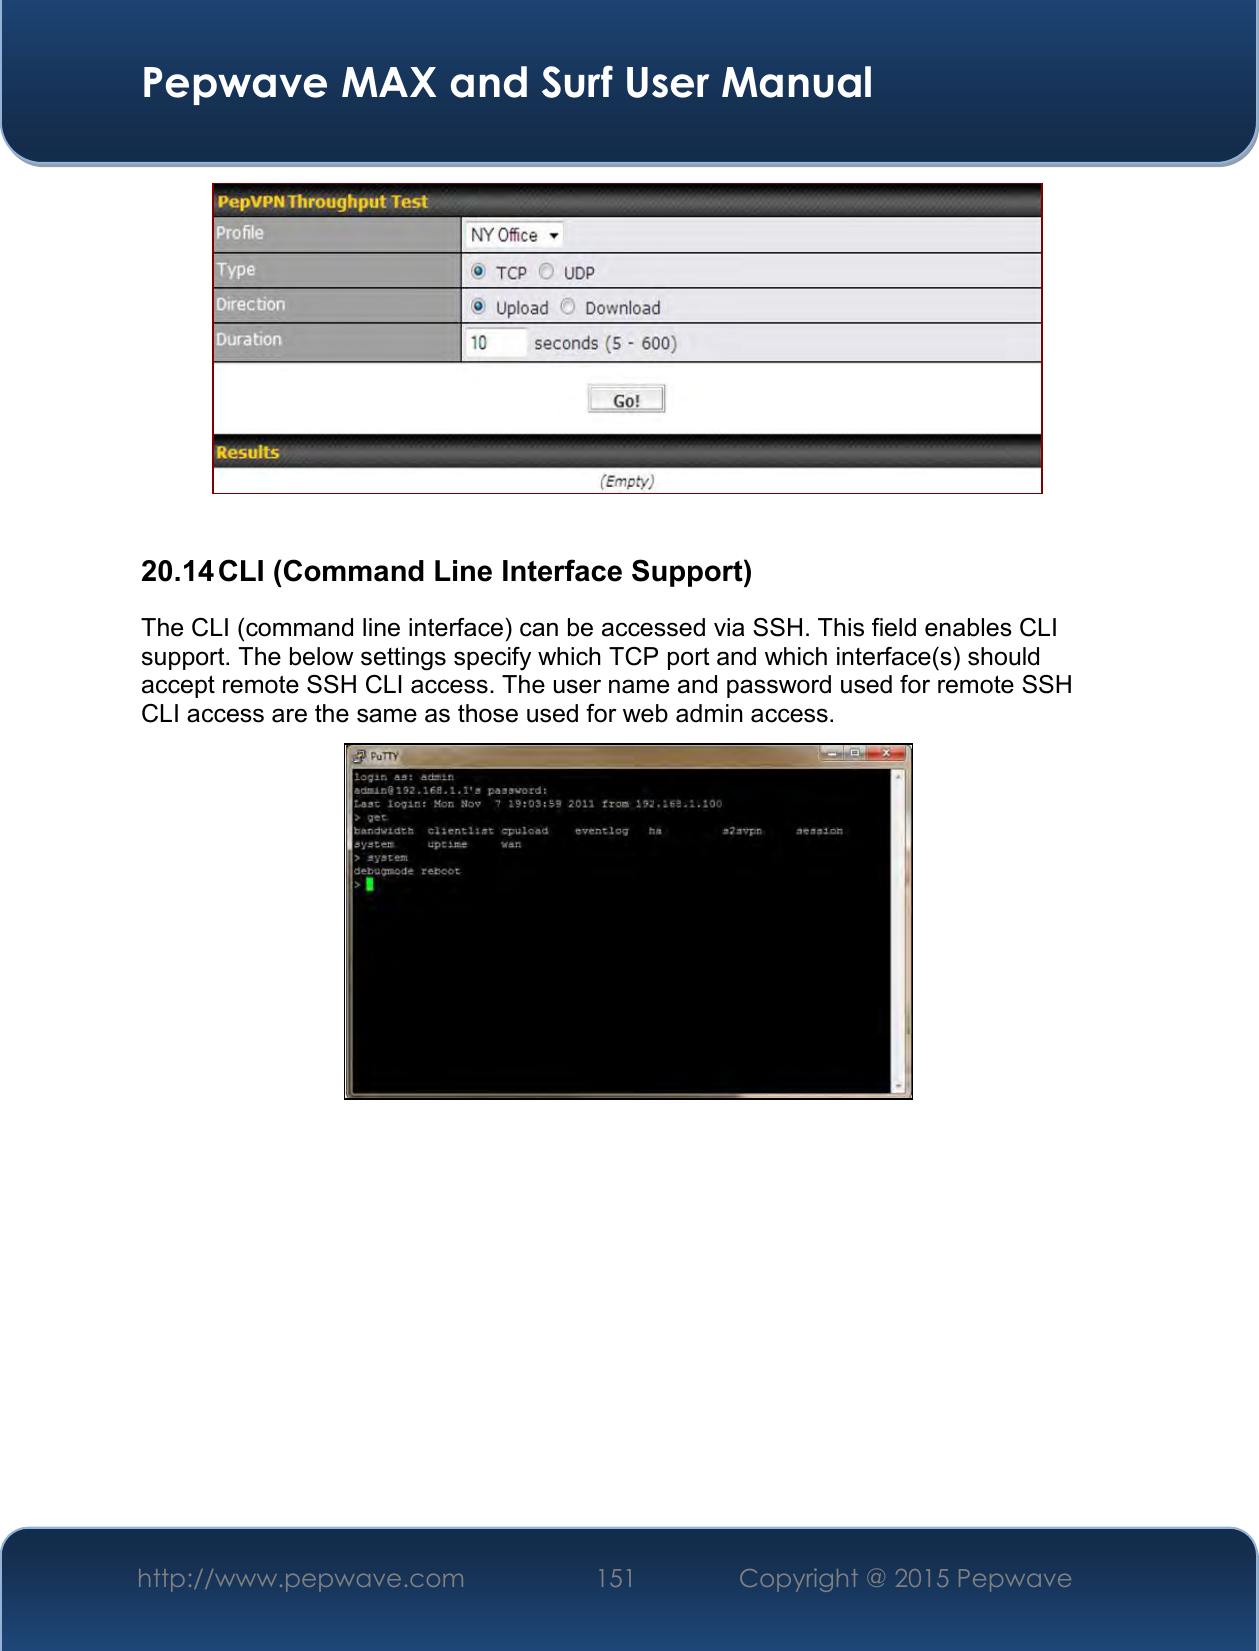  Pepwave MAX and Surf User Manual http://www.pepwave.com 151   Copyright @ 2015 Pepwave     20.14 CLI (Command Line Interface Support) The CLI (command line interface) can be accessed via SSH. This field enables CLI support. The below settings specify which TCP port and which interface(s) should accept remote SSH CLI access. The user name and password used for remote SSH CLI access are the same as those used for web admin access.    